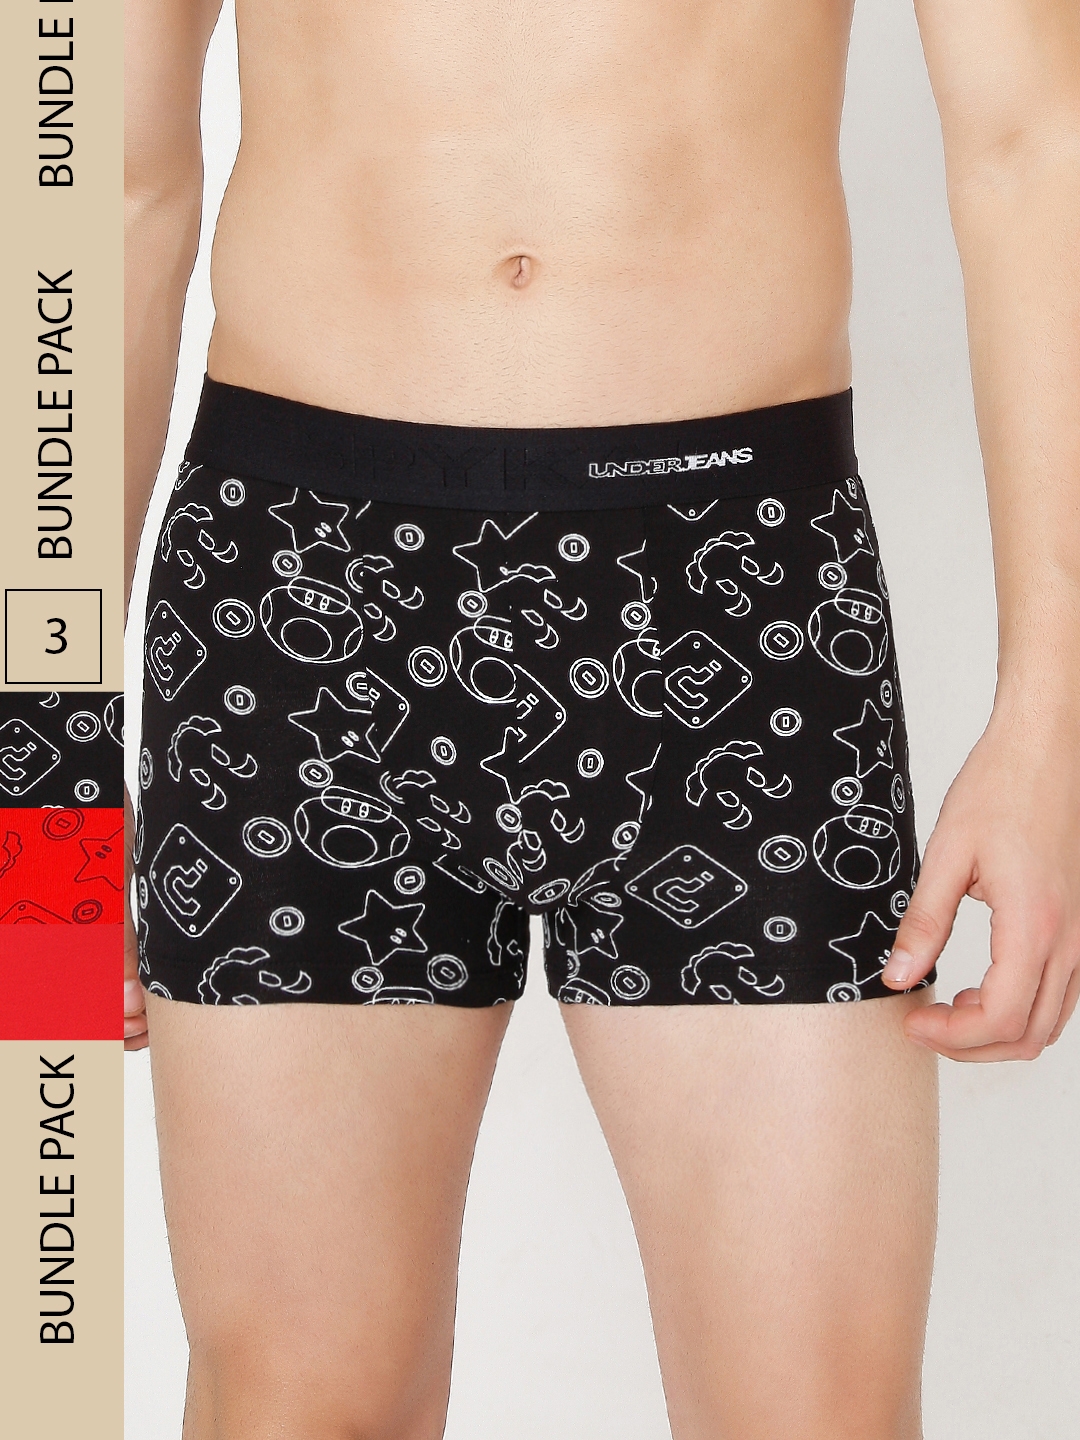 Underjeans by Spykar Premium Red & Black Cotton Blend Printed Trunk - Pack Of 3